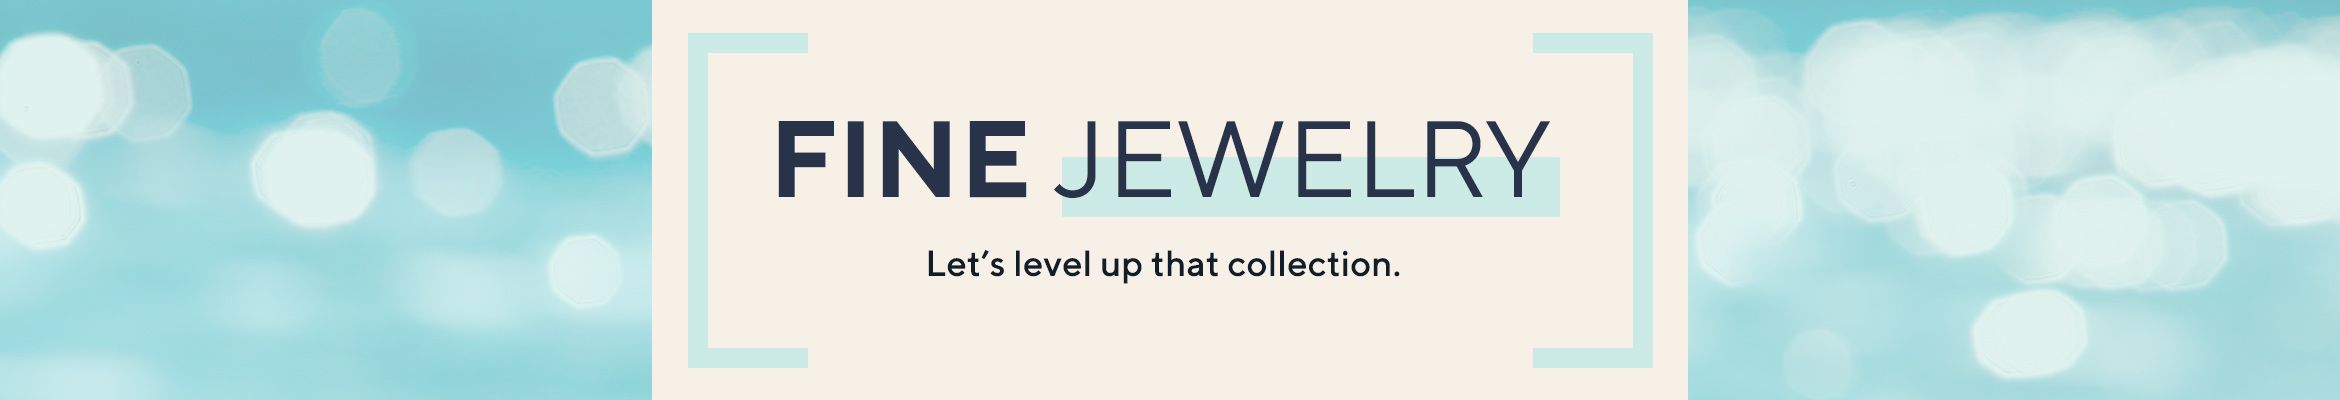 Fine Jewelry - Let's level up that collection.